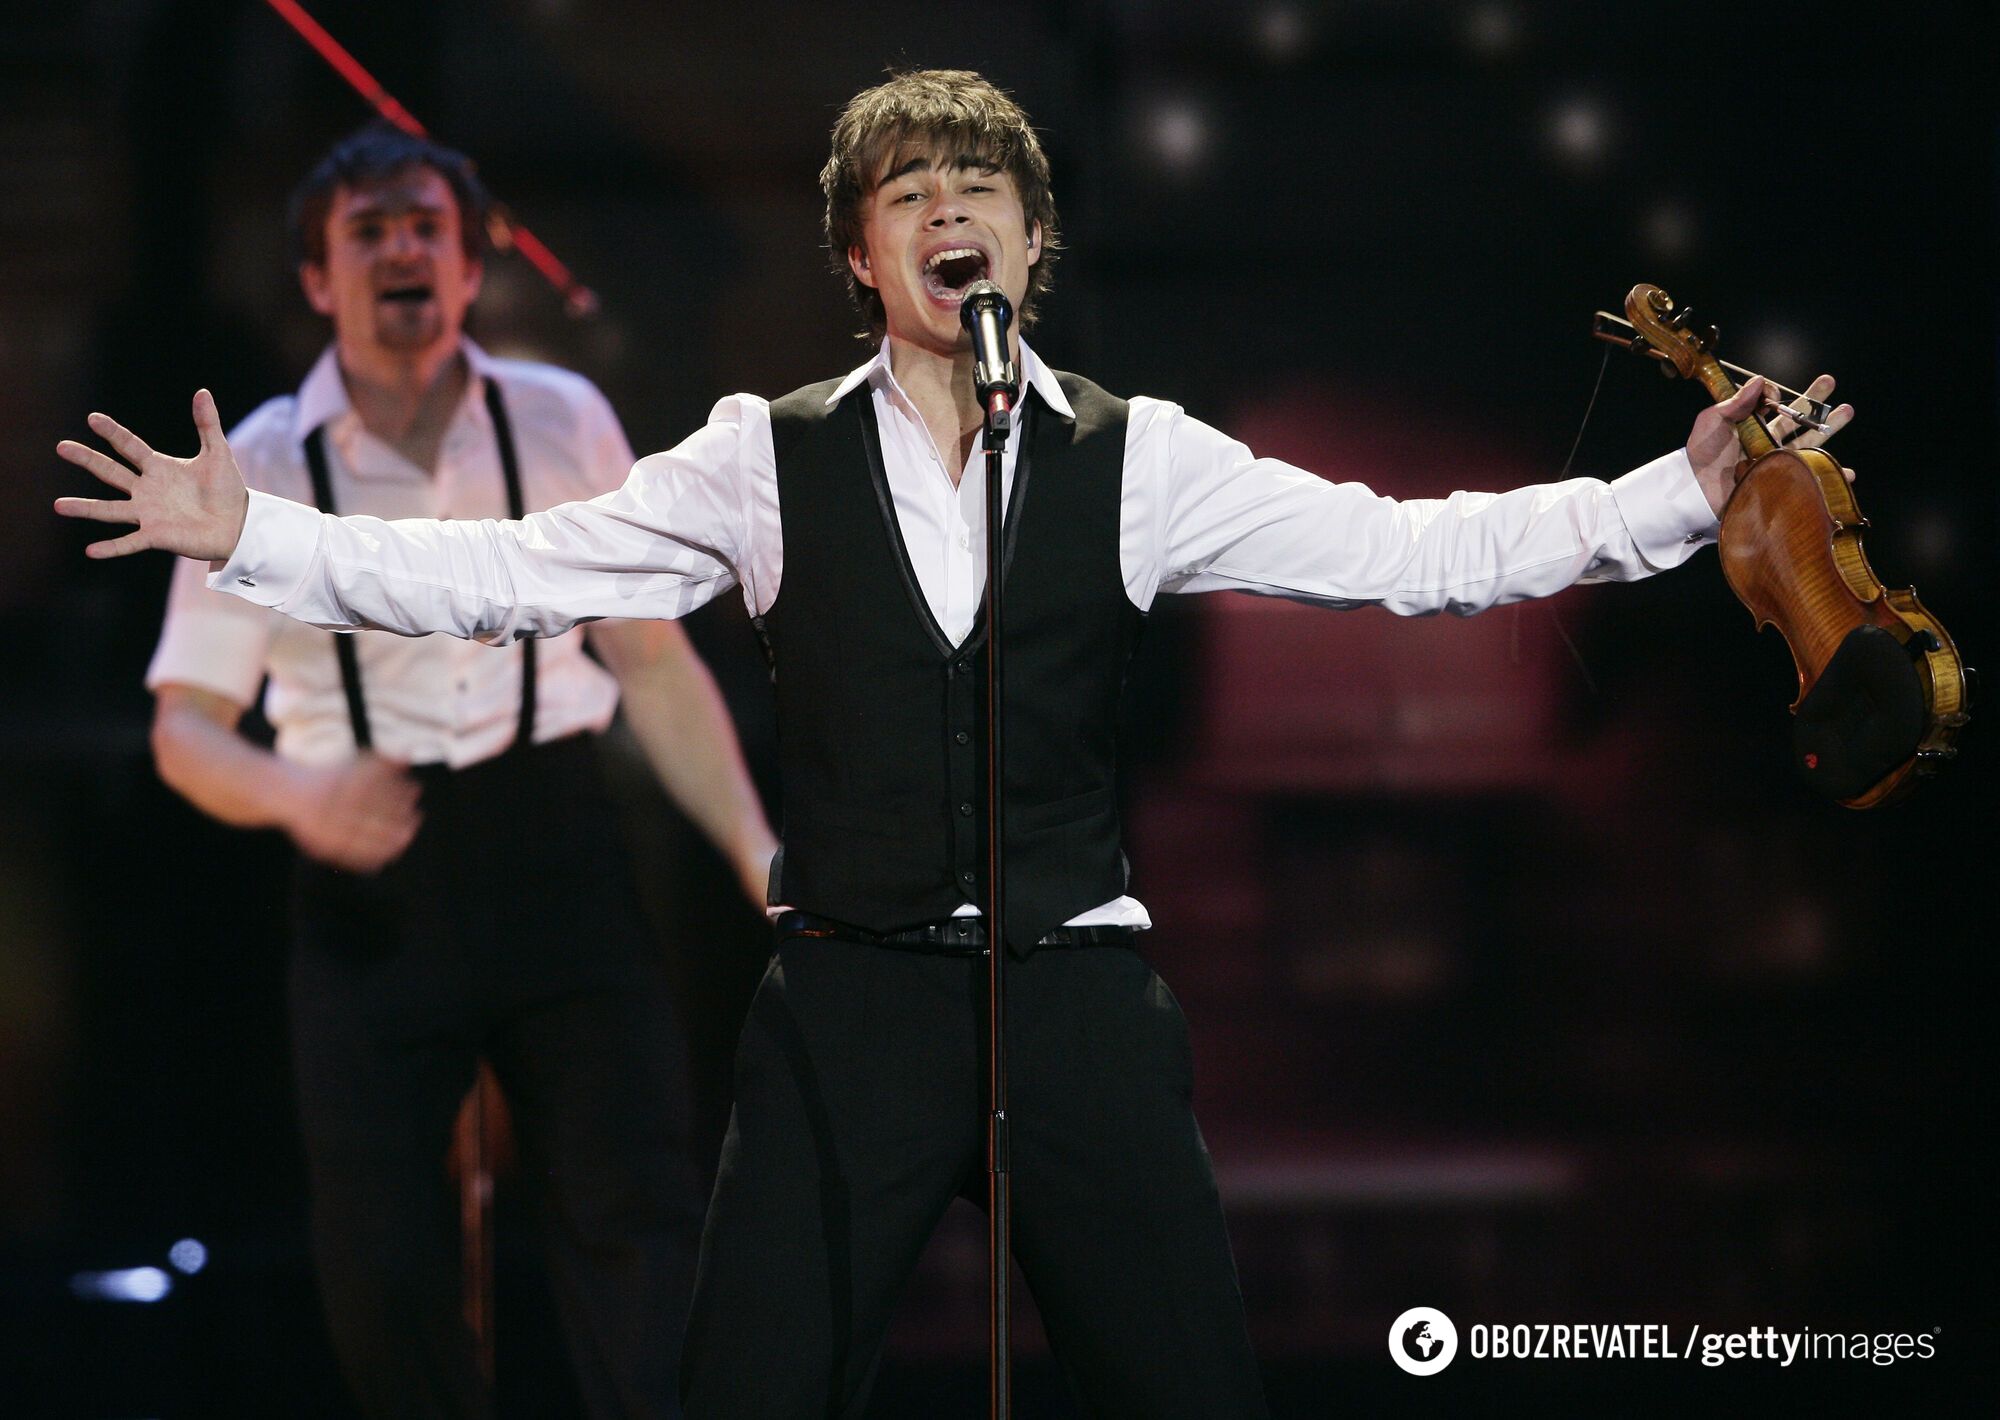 Not the only one to break the crystal microphone. The Internet recalled the embarrassment at Eurovision 2009